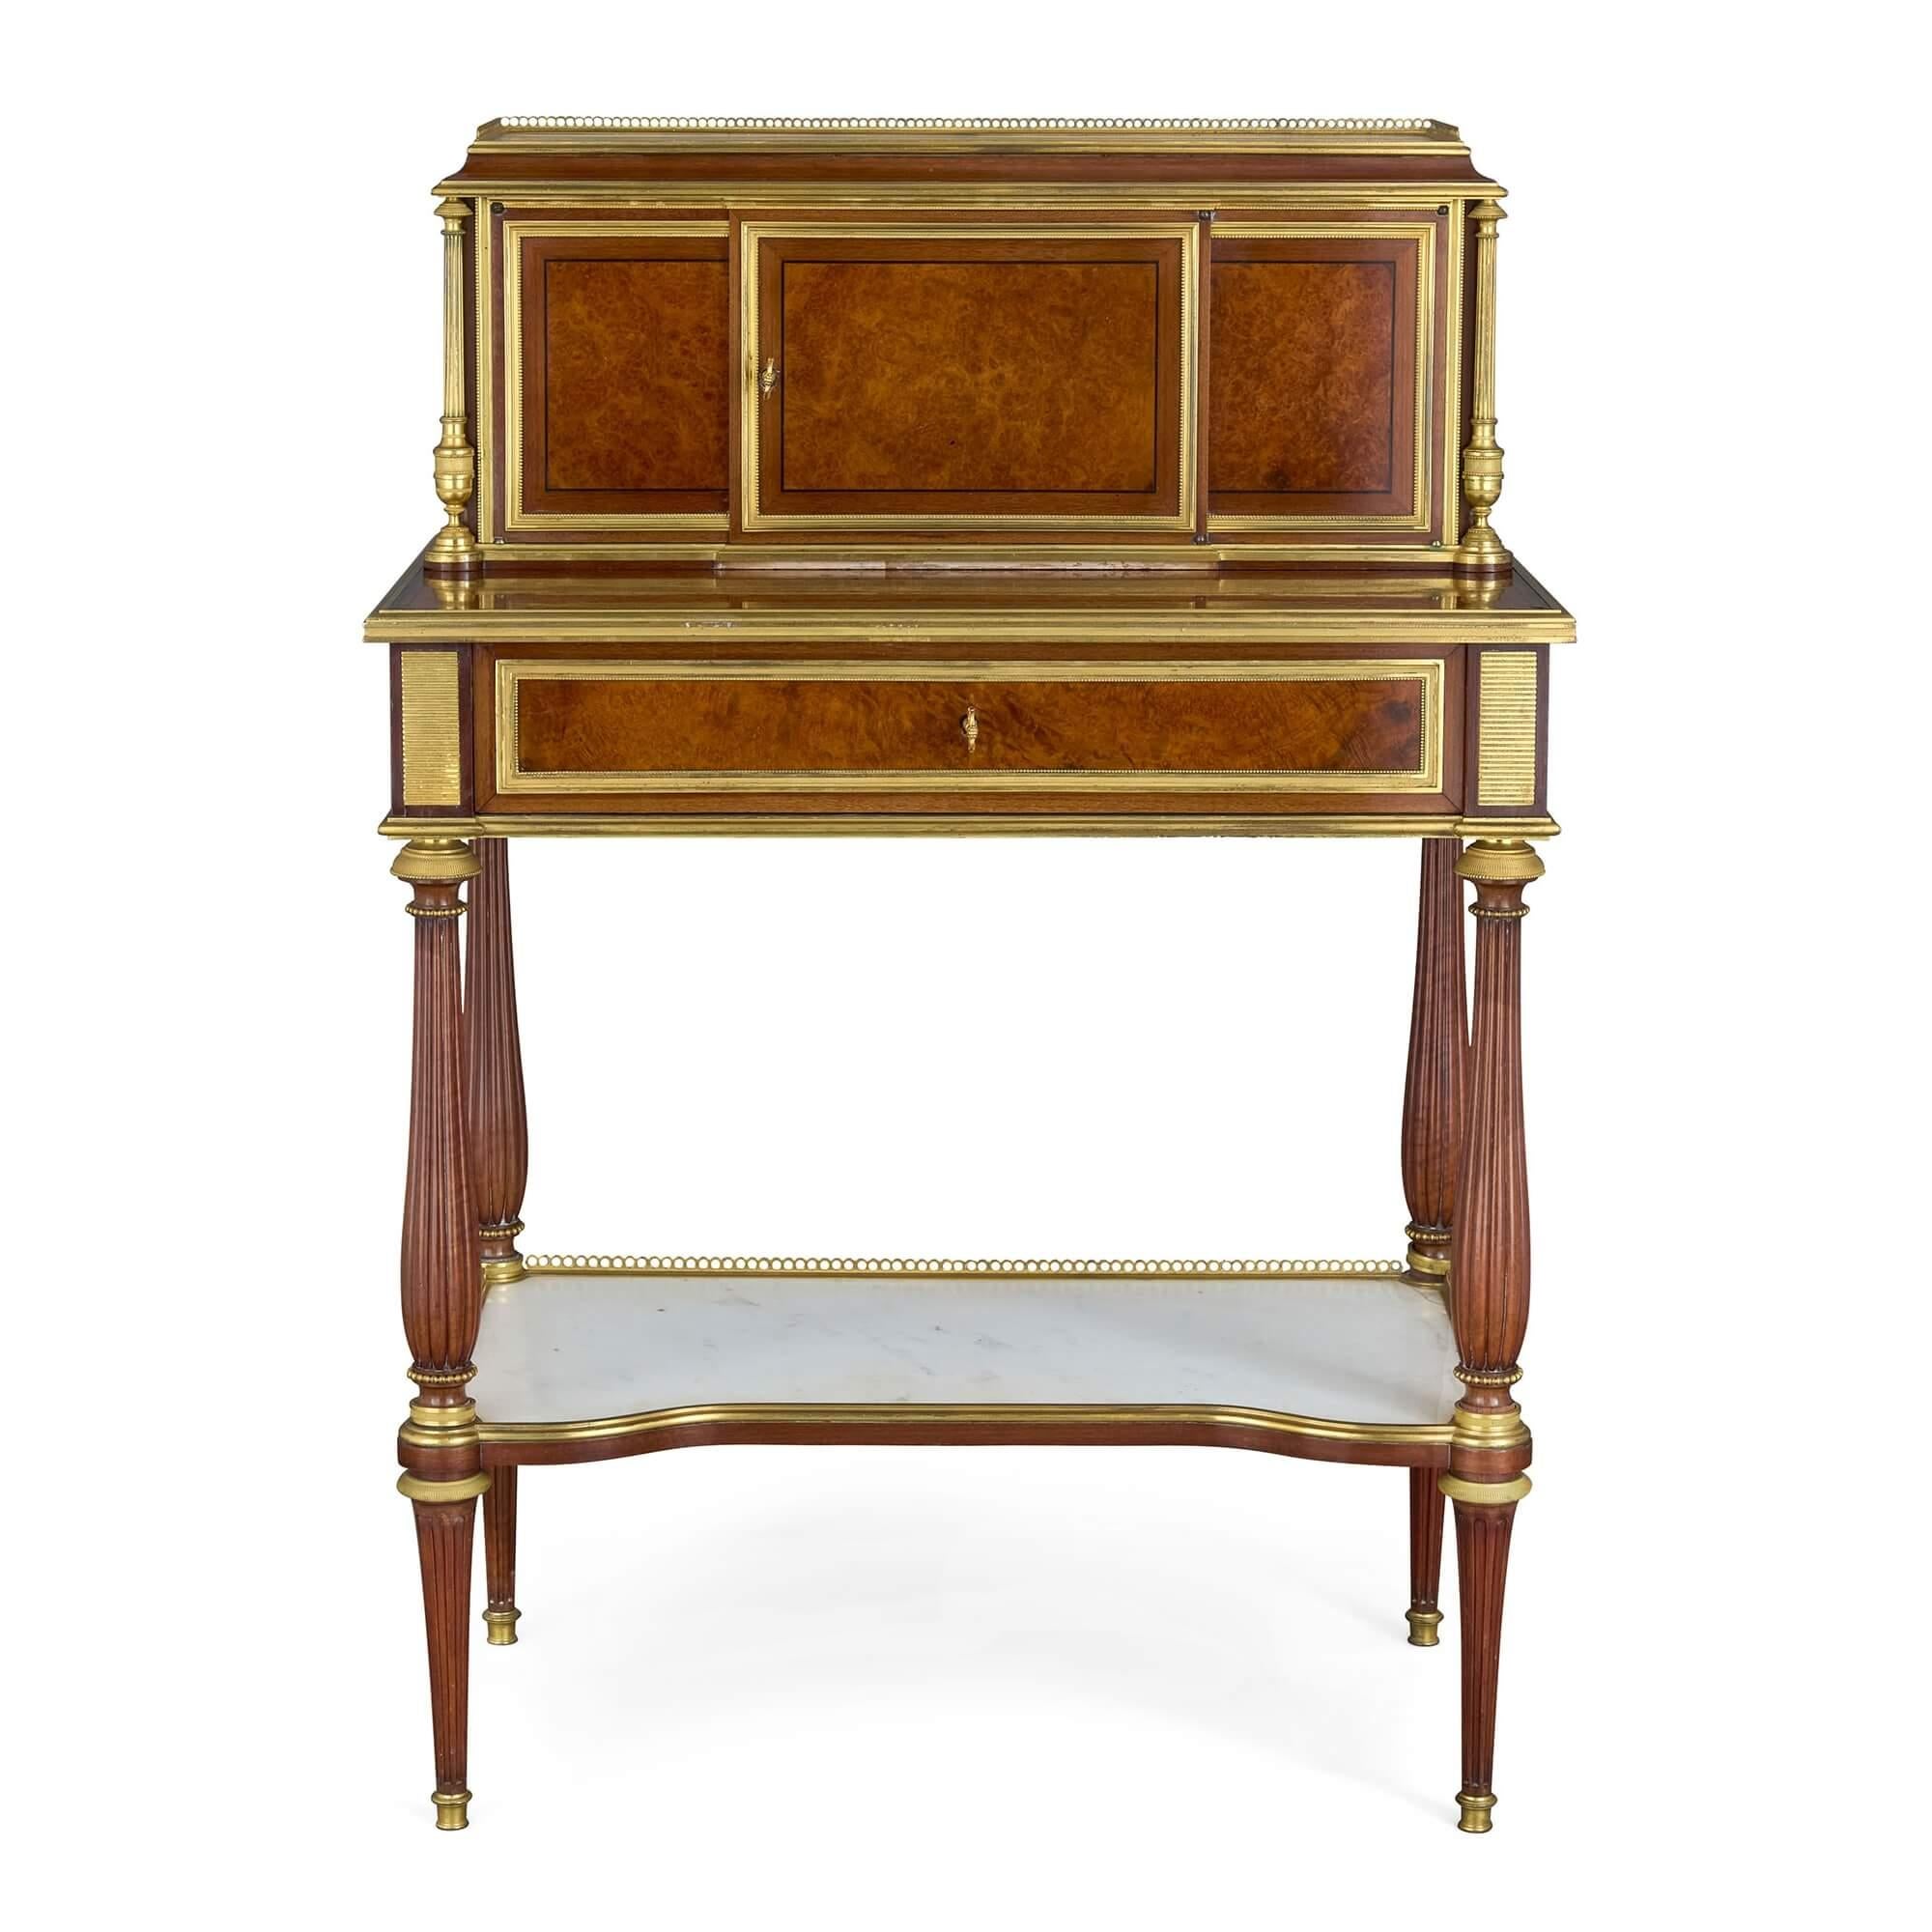 Antique Louis XVI style mahogany and ormolu bonheur du jour by Winckelsen
French, 1864
Height 105cm, width 73cm, depth 42cm

Charles-Guillaume Winckelsen (French, 1812-1871) is the craftsman responsible for this outstanding bonheur du jour. The